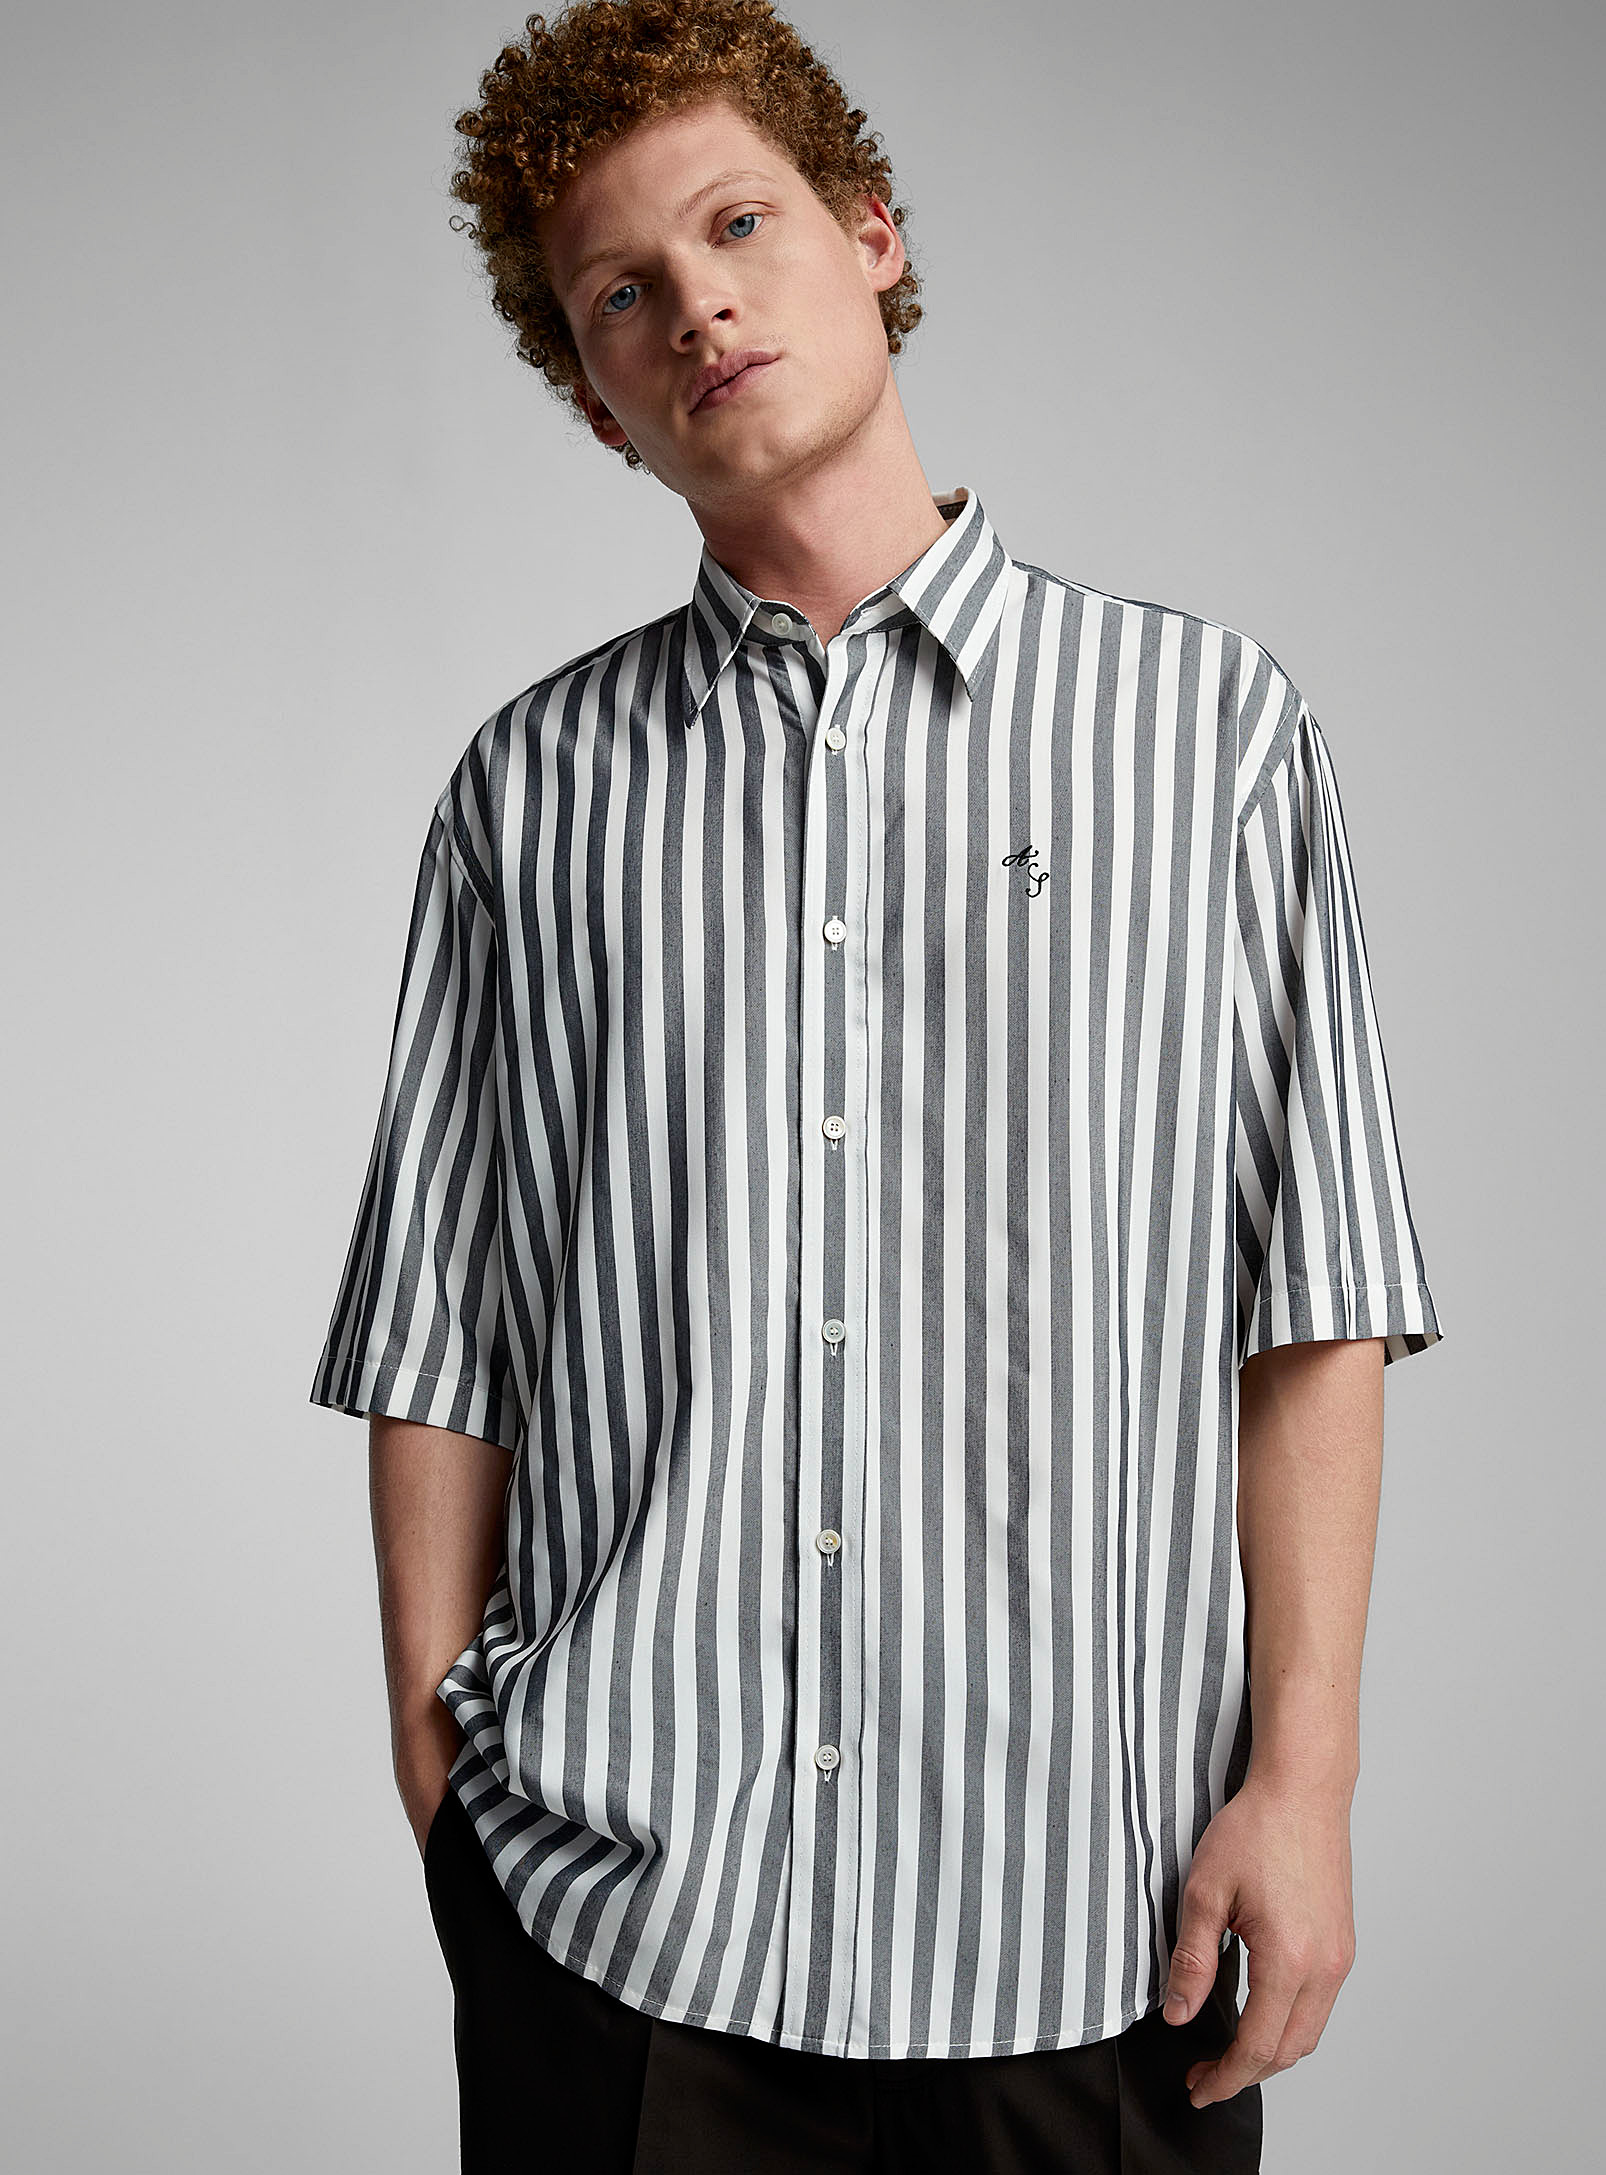 Acne Studios - Men's Embroidered initials striped shirt